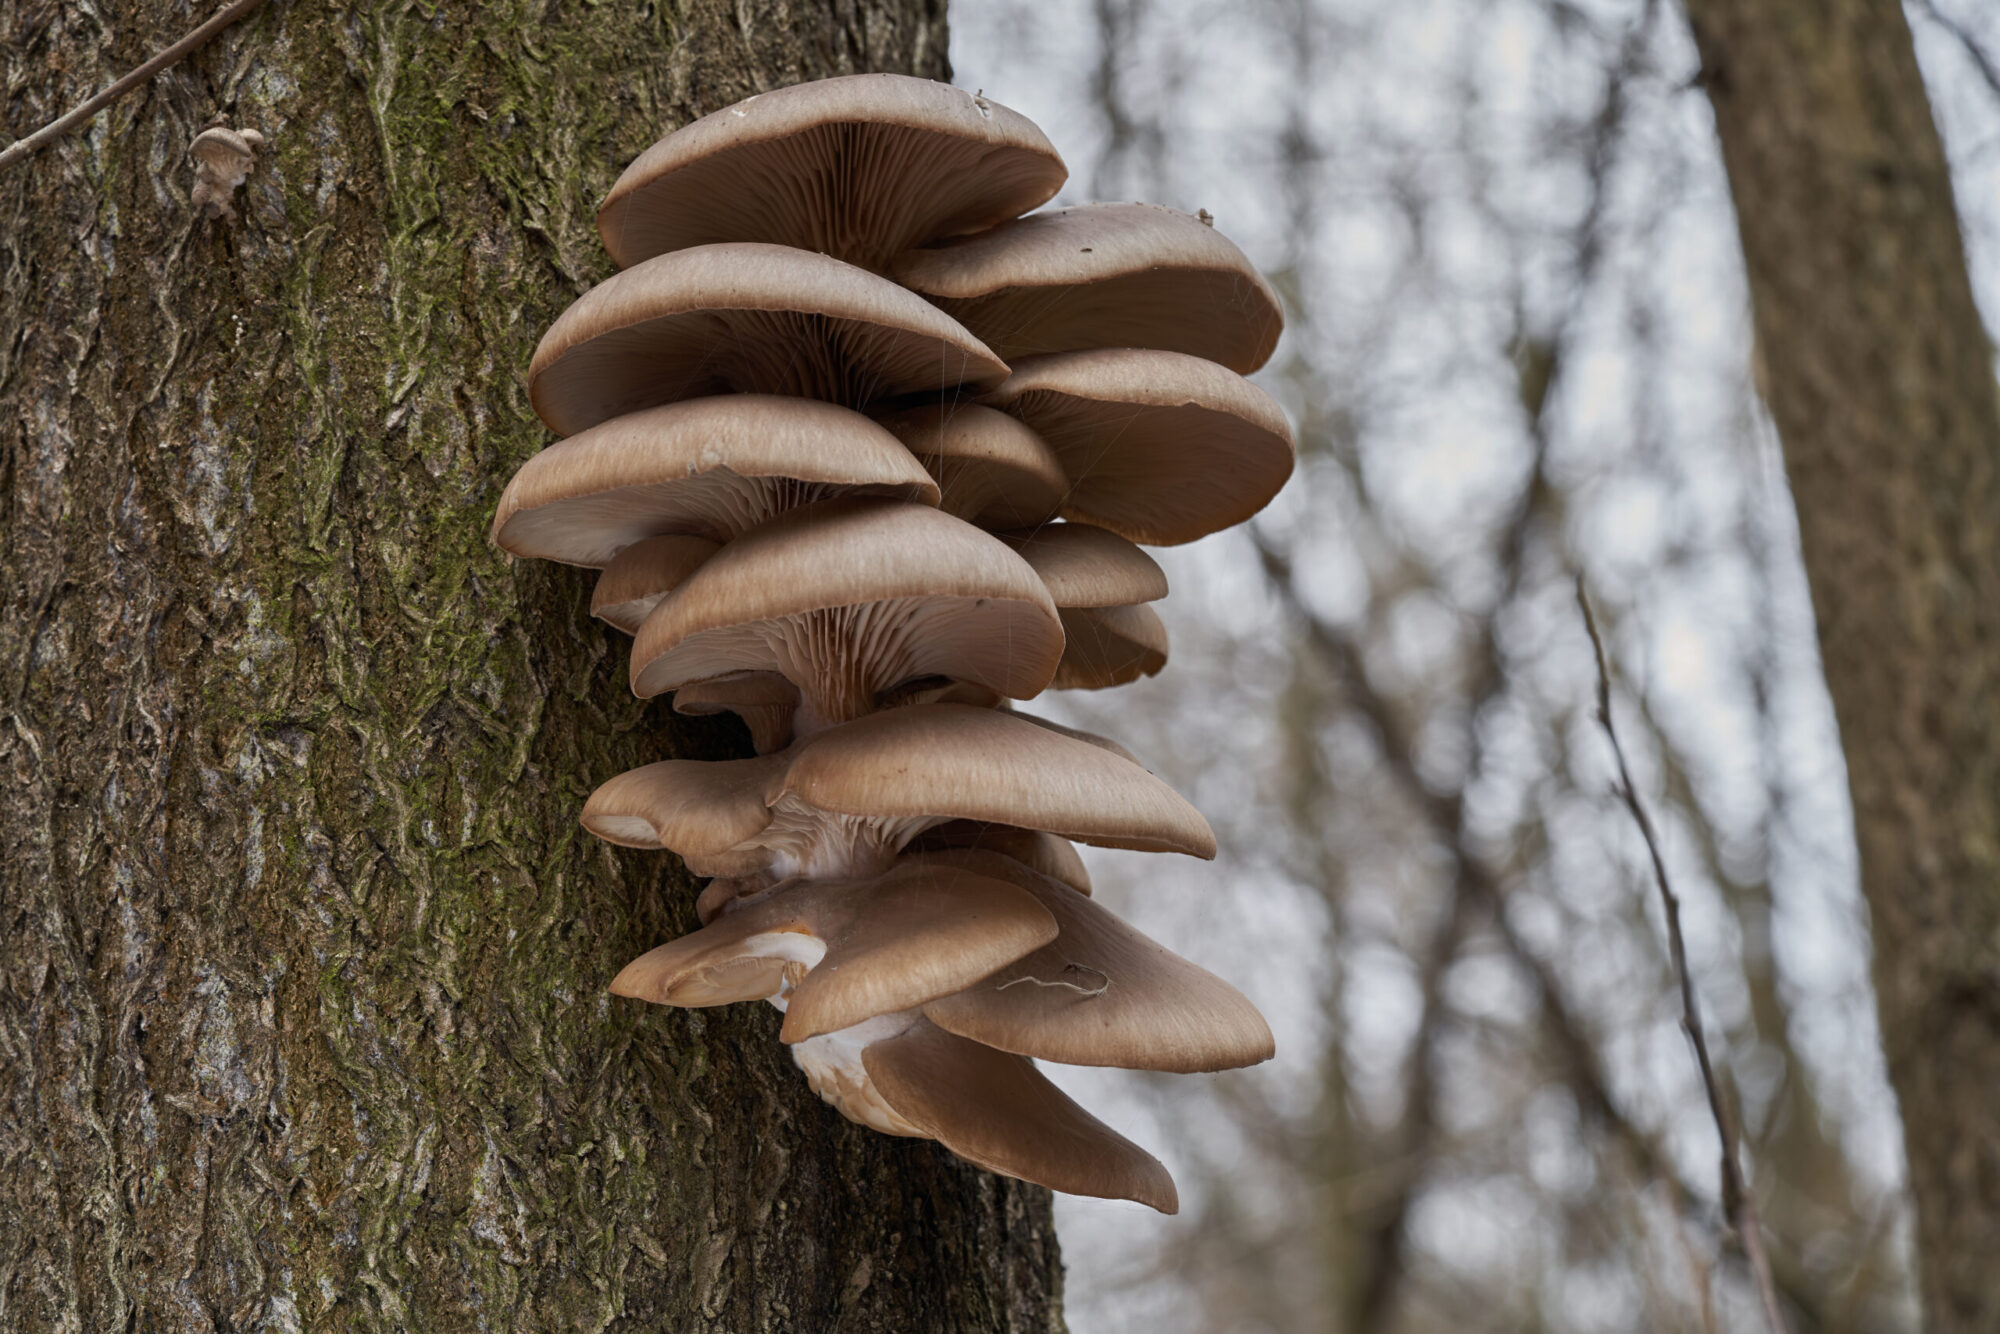 oyster mushrooms growing on standing tree